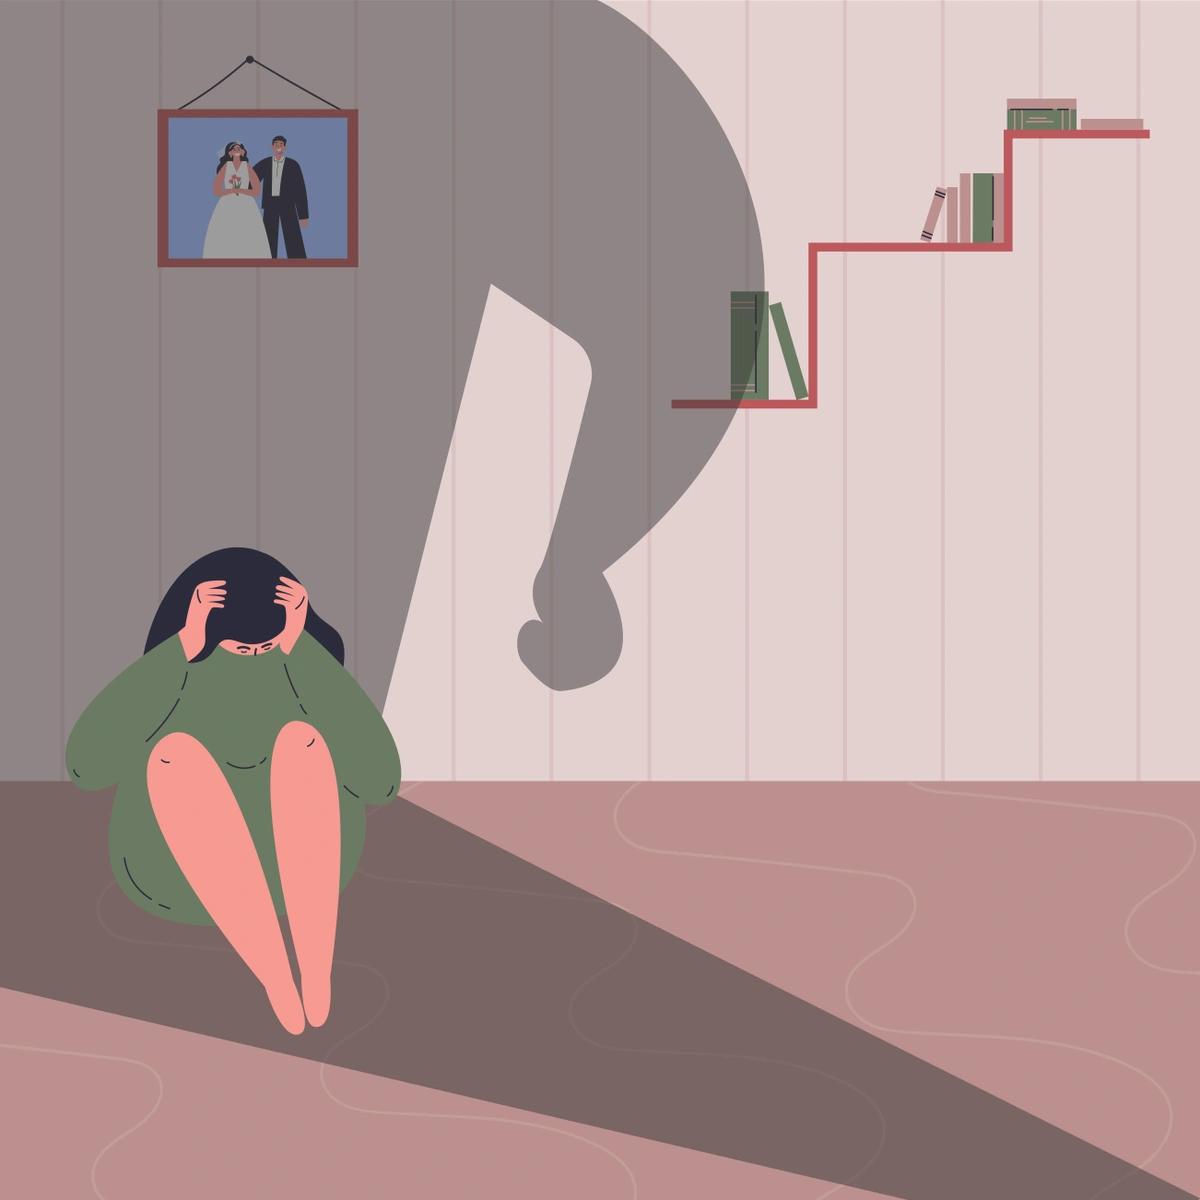 Illustration of woman cowering on the floor with the shadow of her abuser looming over her